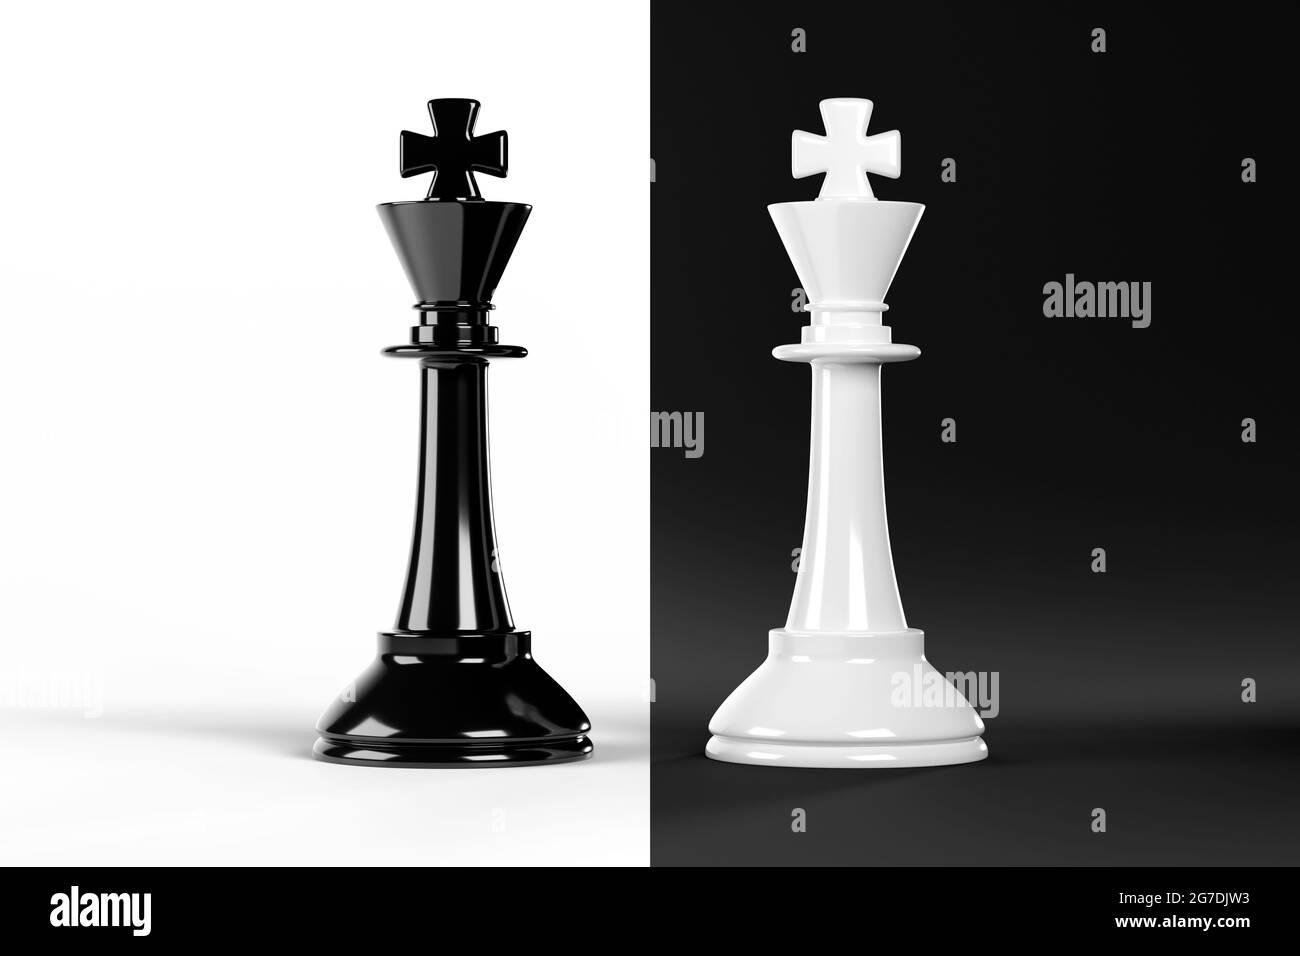 Black chess king background 3d illustration. Stock Photo by